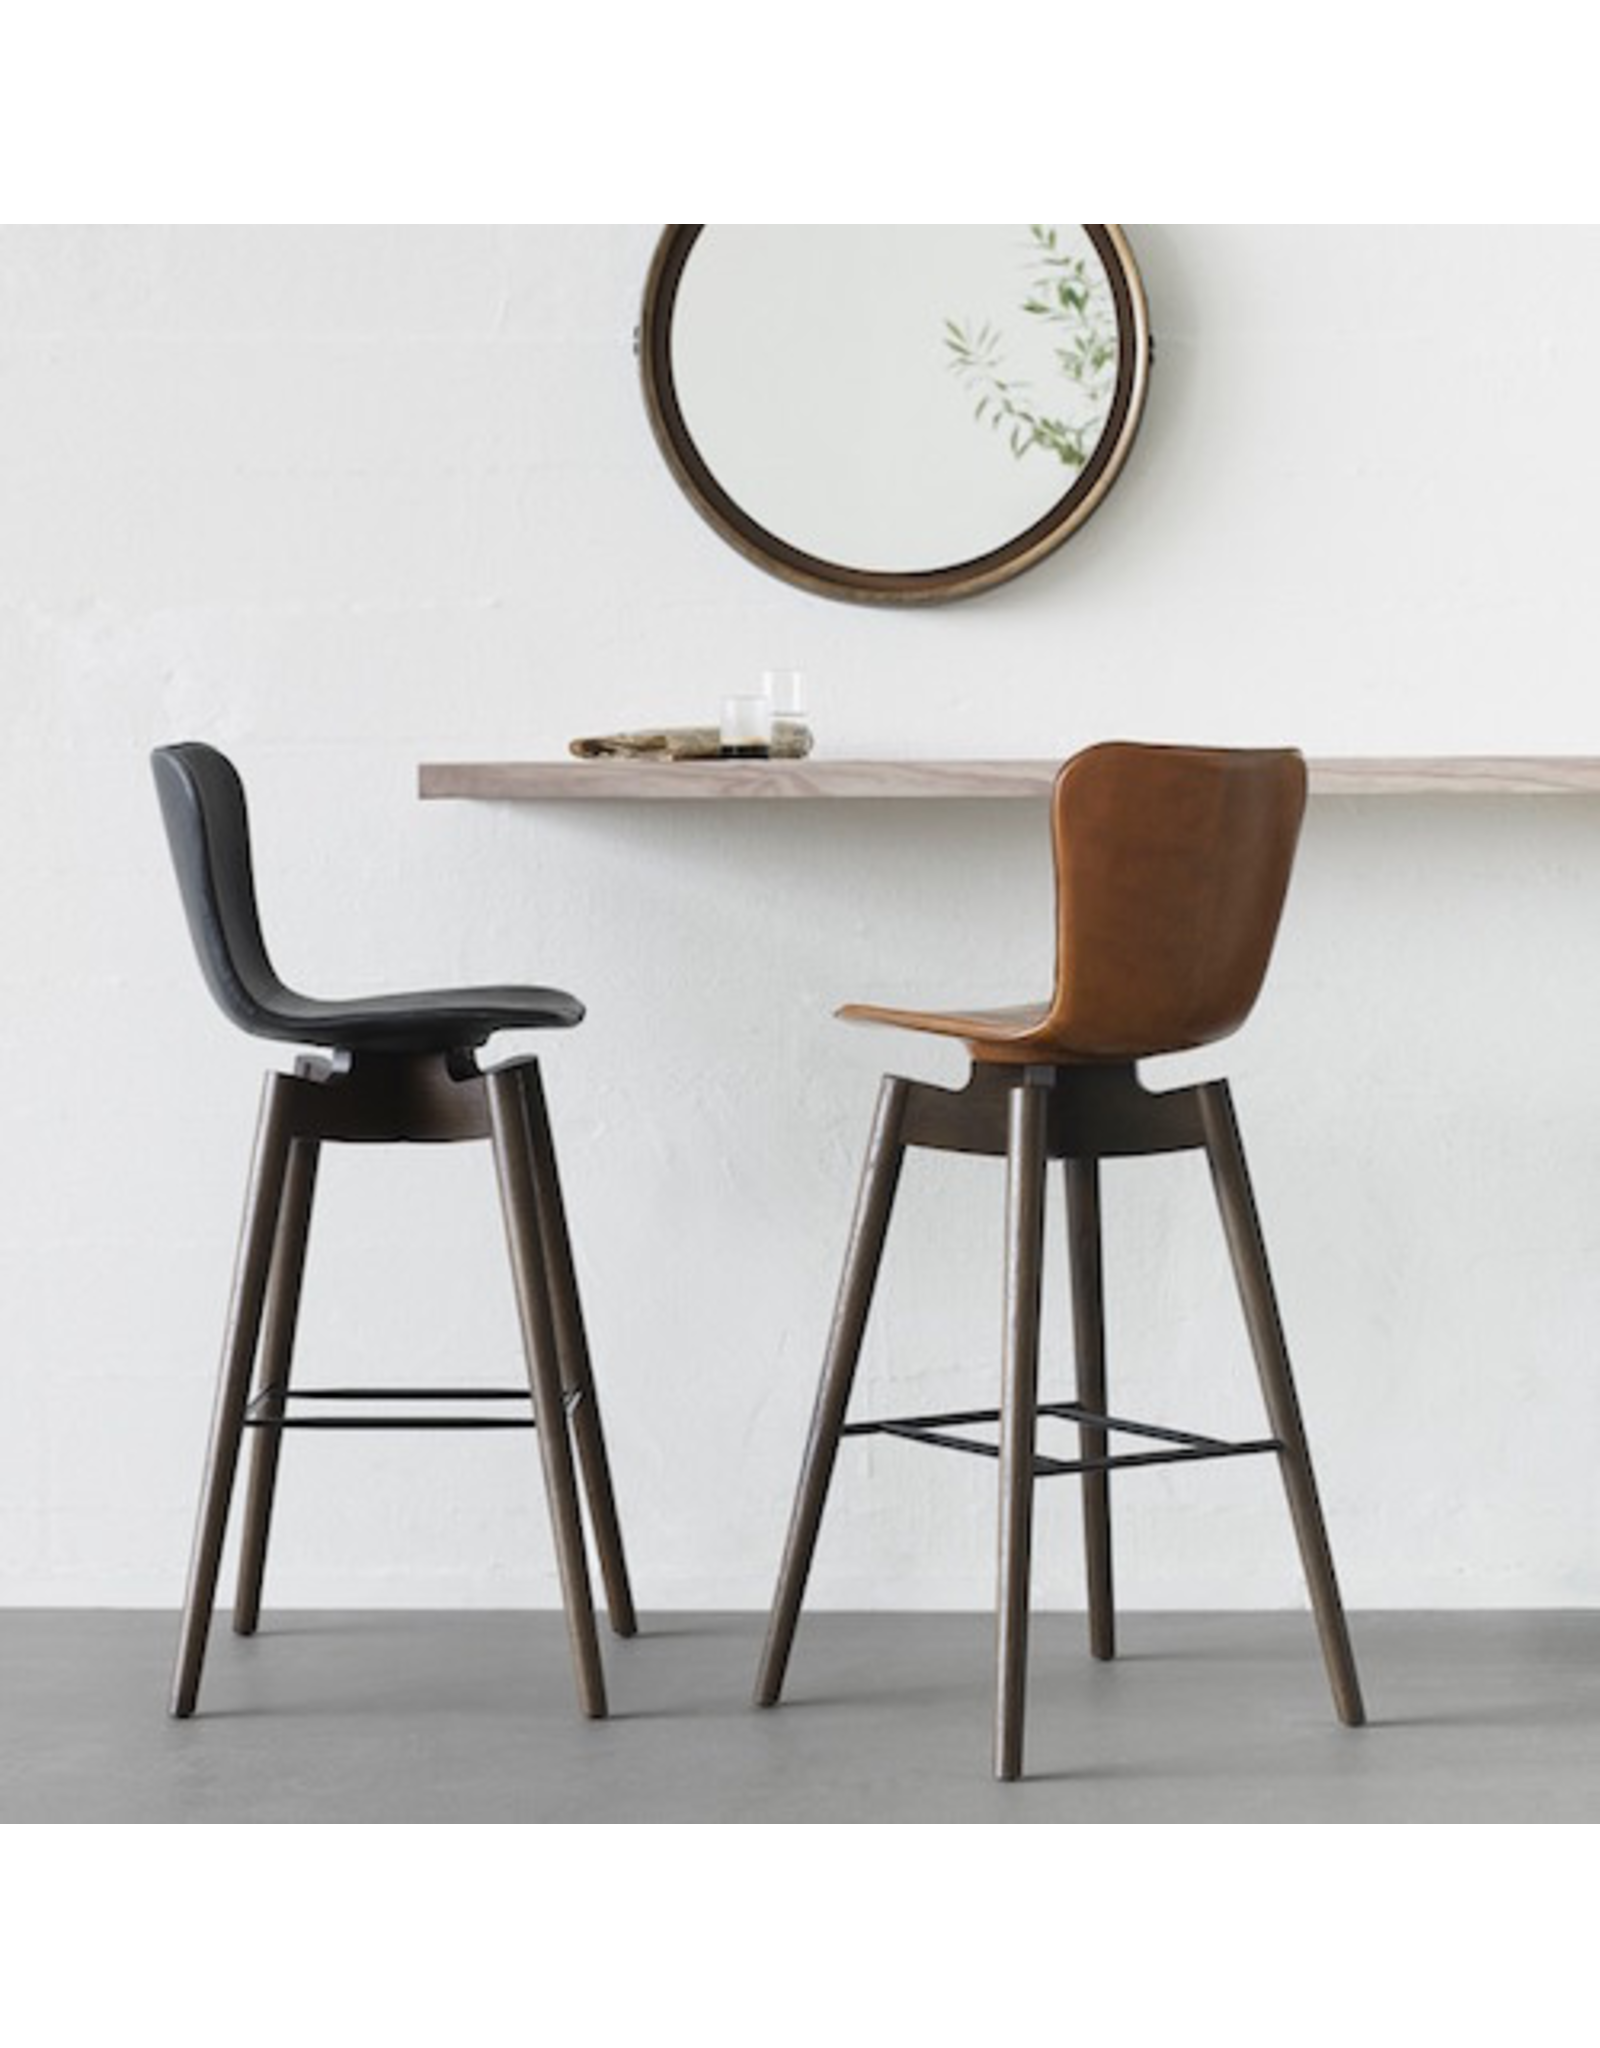 SHELL BARSTOOL IN ULTRA COGNAC LEATHER